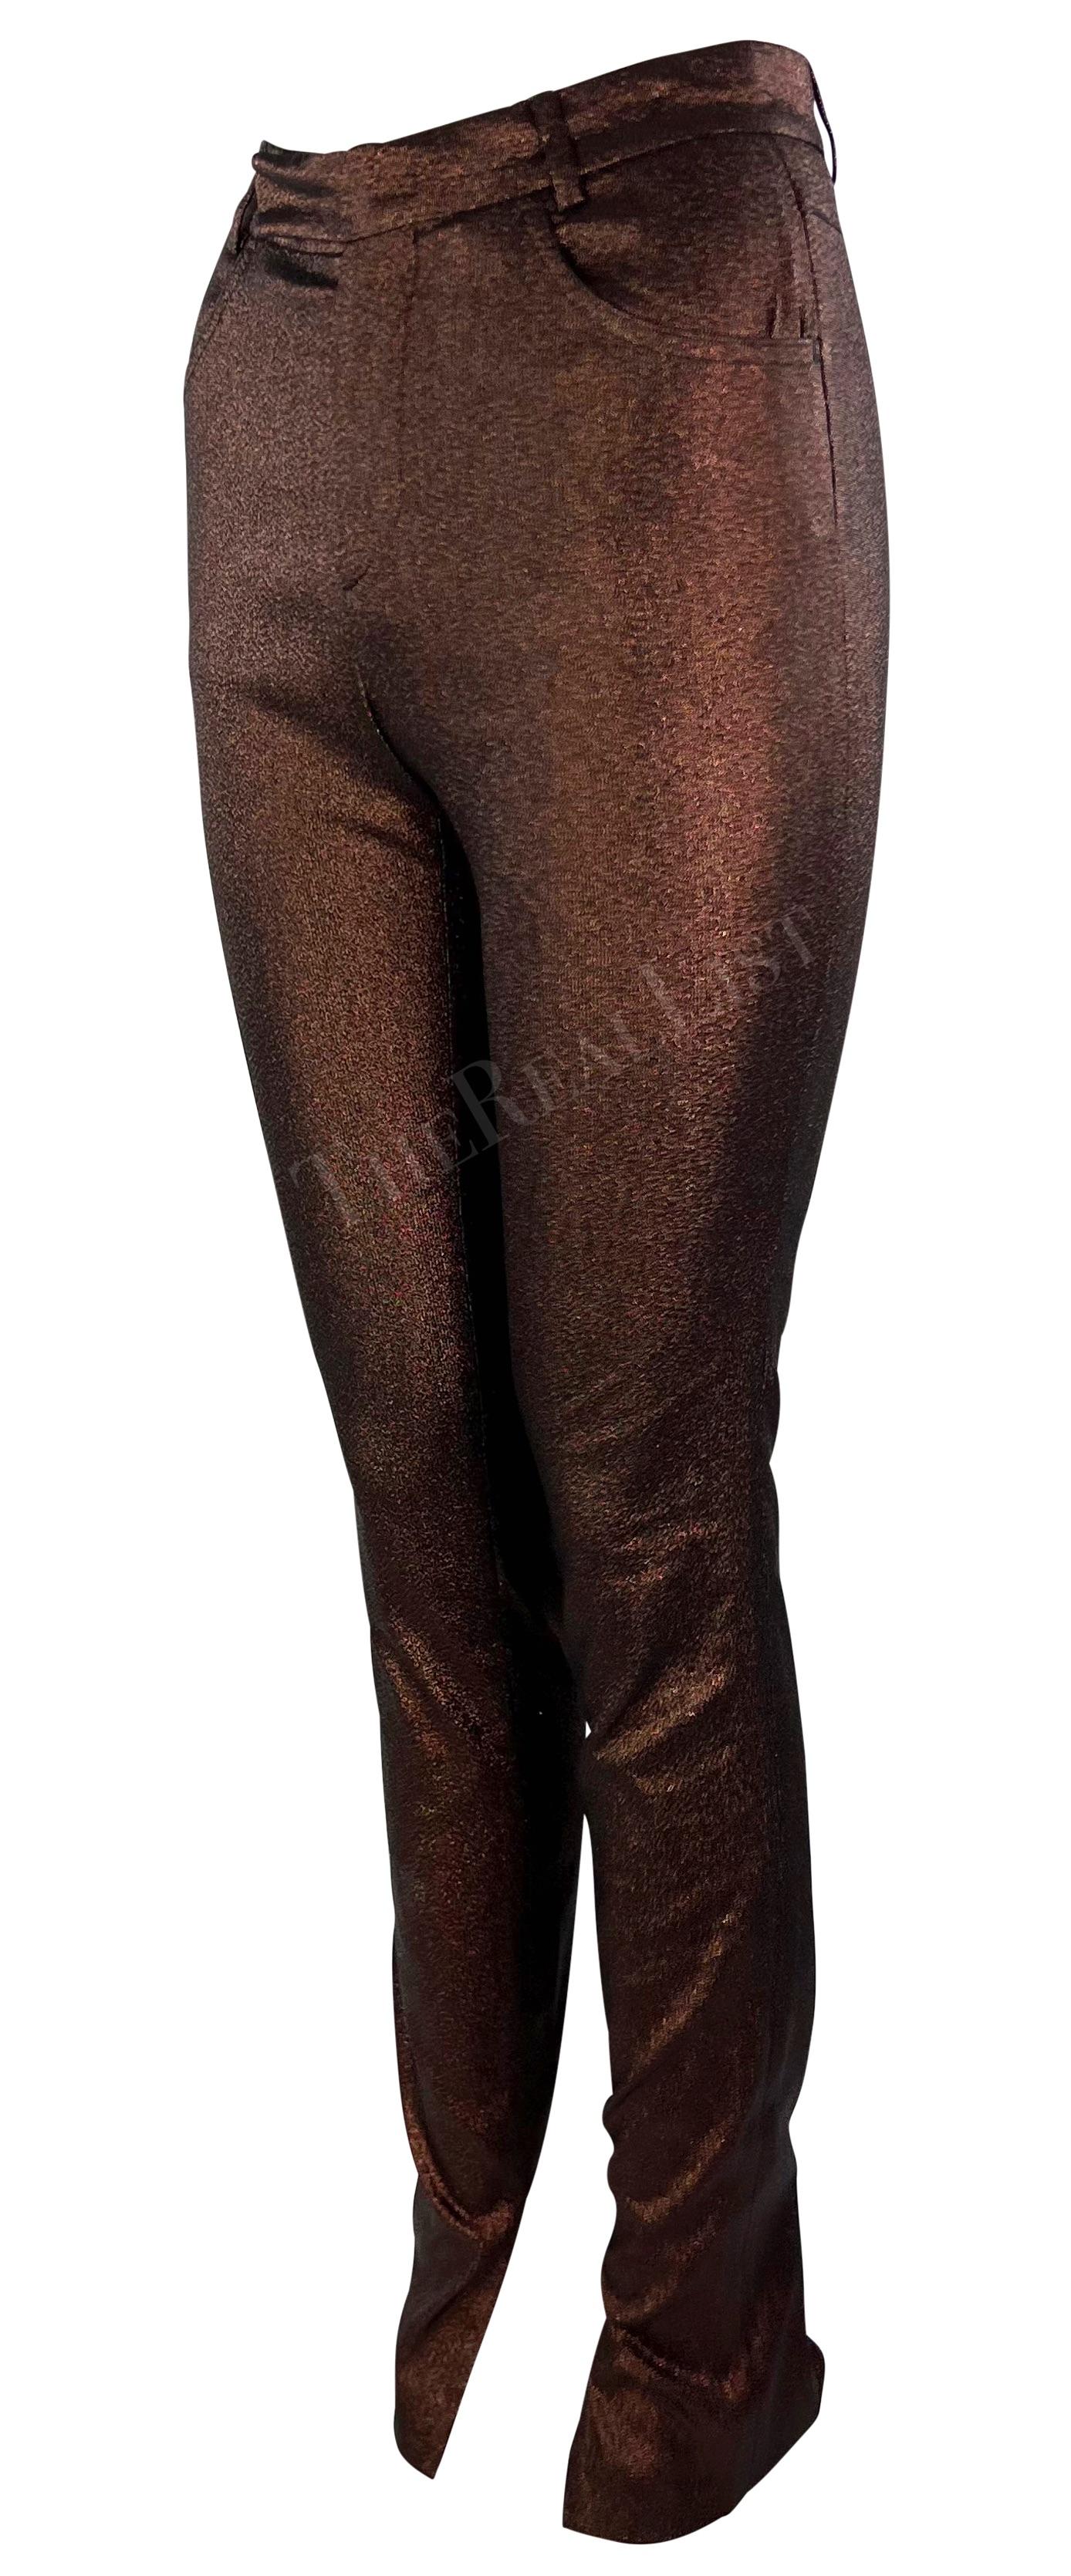 S/S 1997 Gucci by Tom Ford Runway Ad Copper Metallic Skinny Lurex Stretch Pants For Sale 2